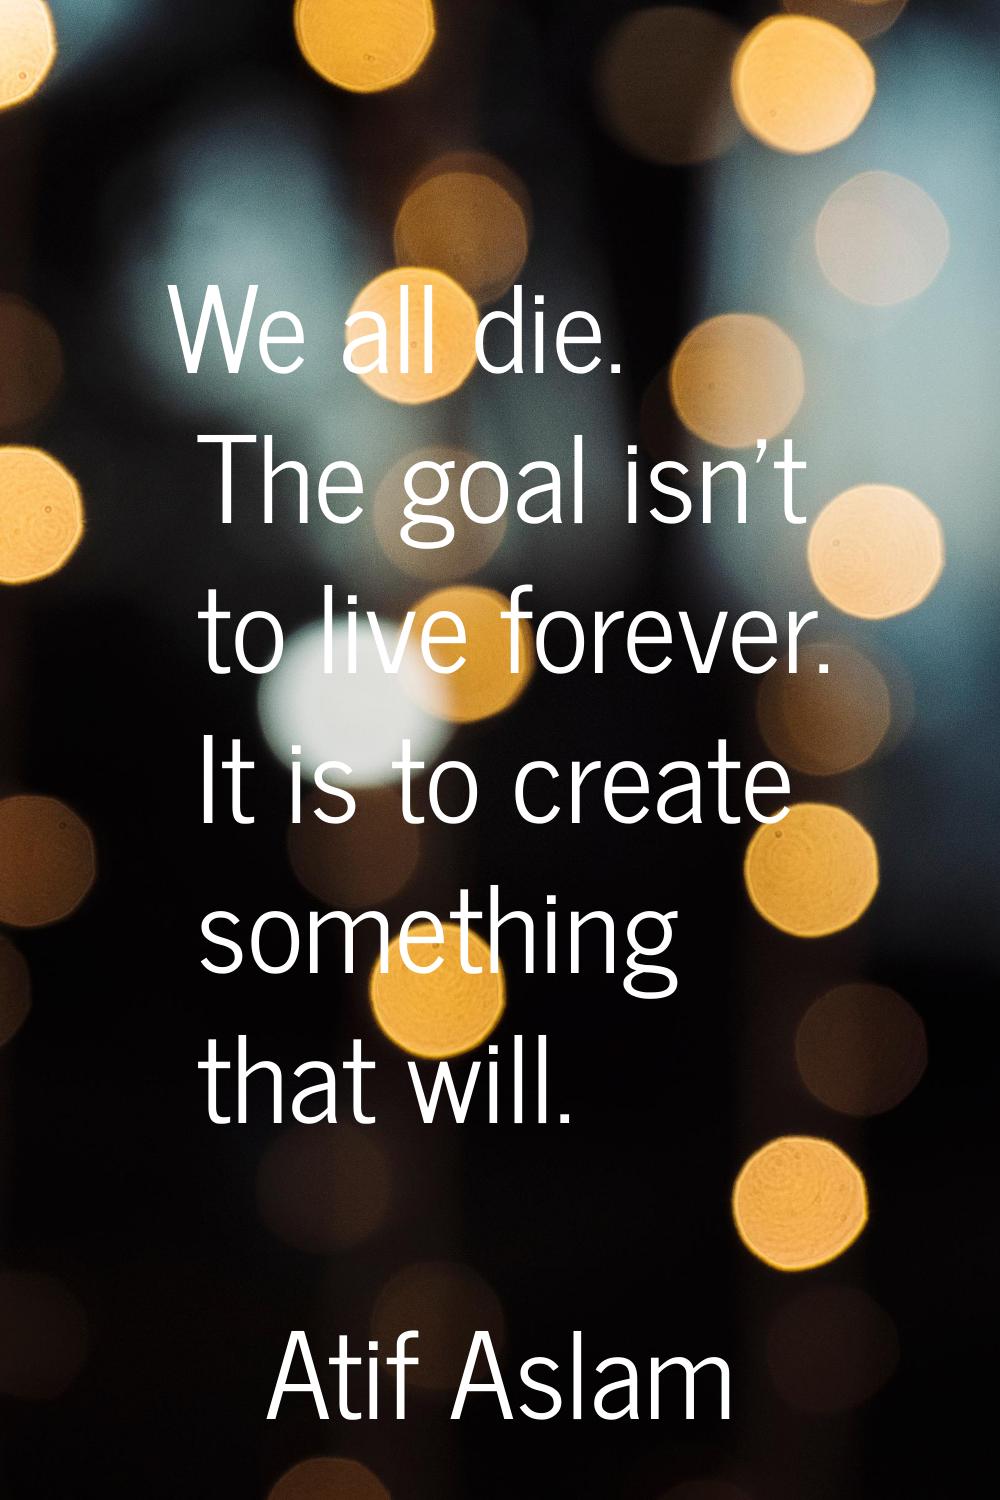 We all die. The goal isn't to live forever. It is to create something that will.